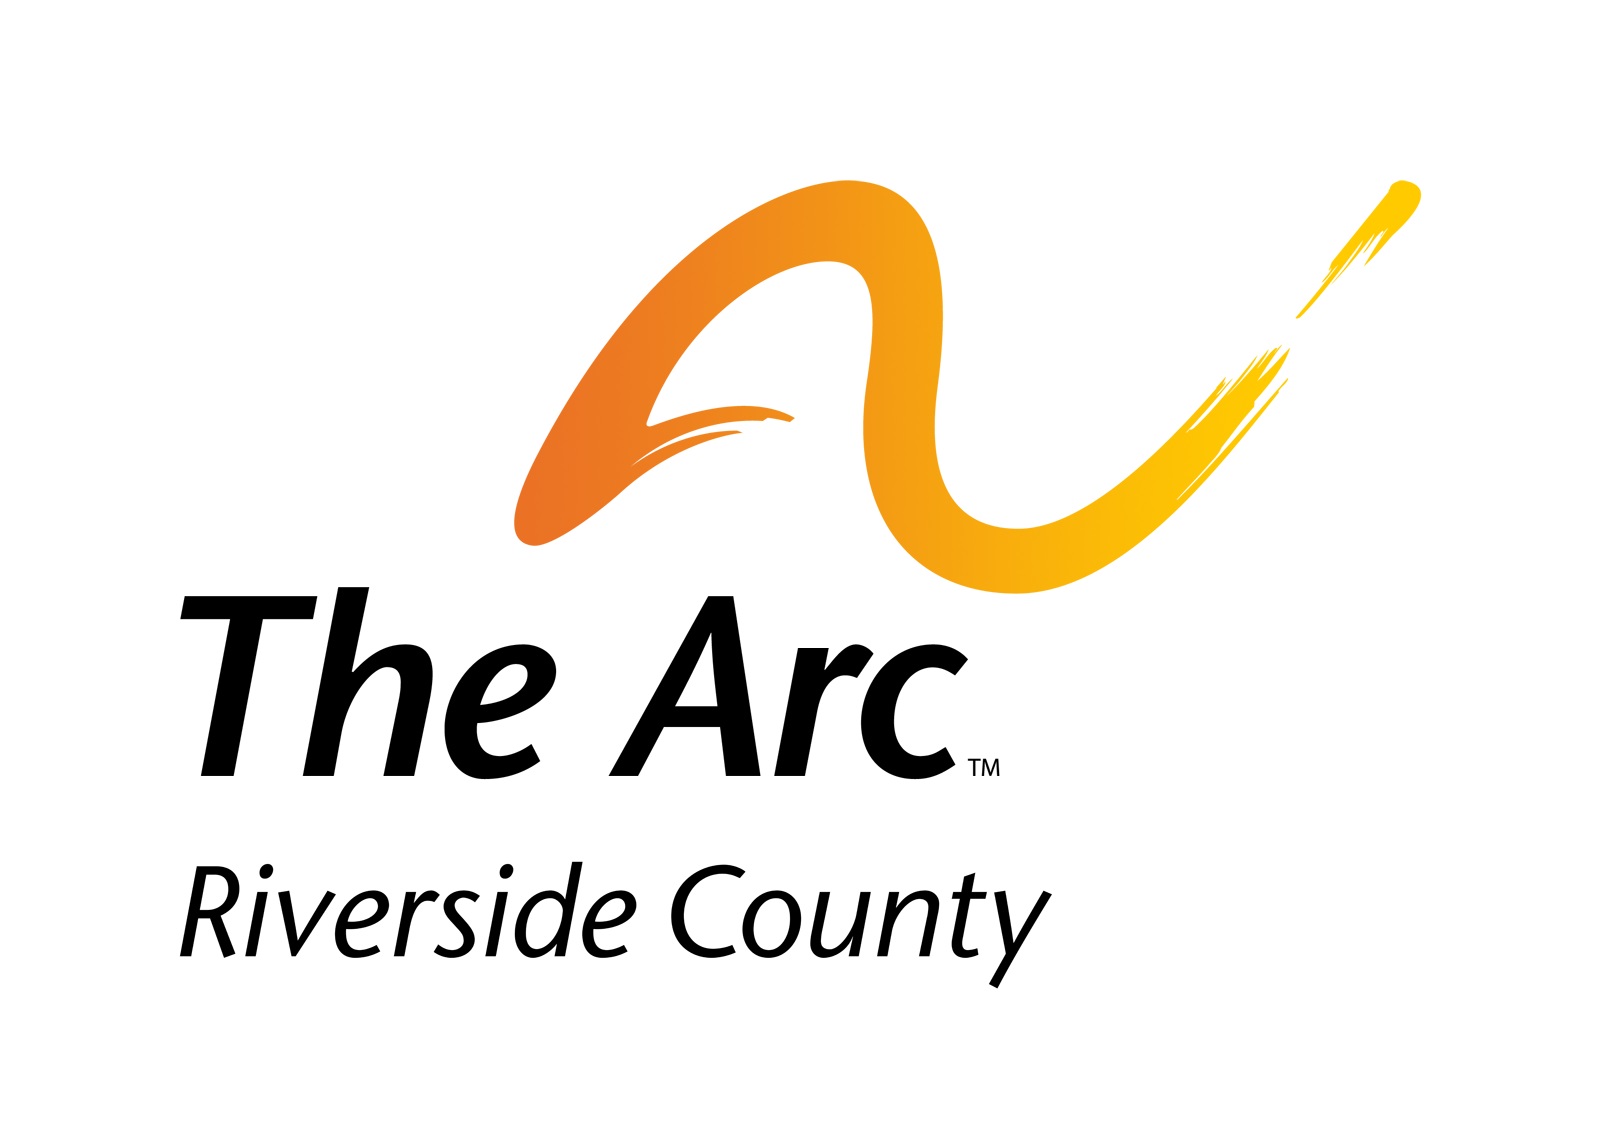 The Arc of Riverside County logo